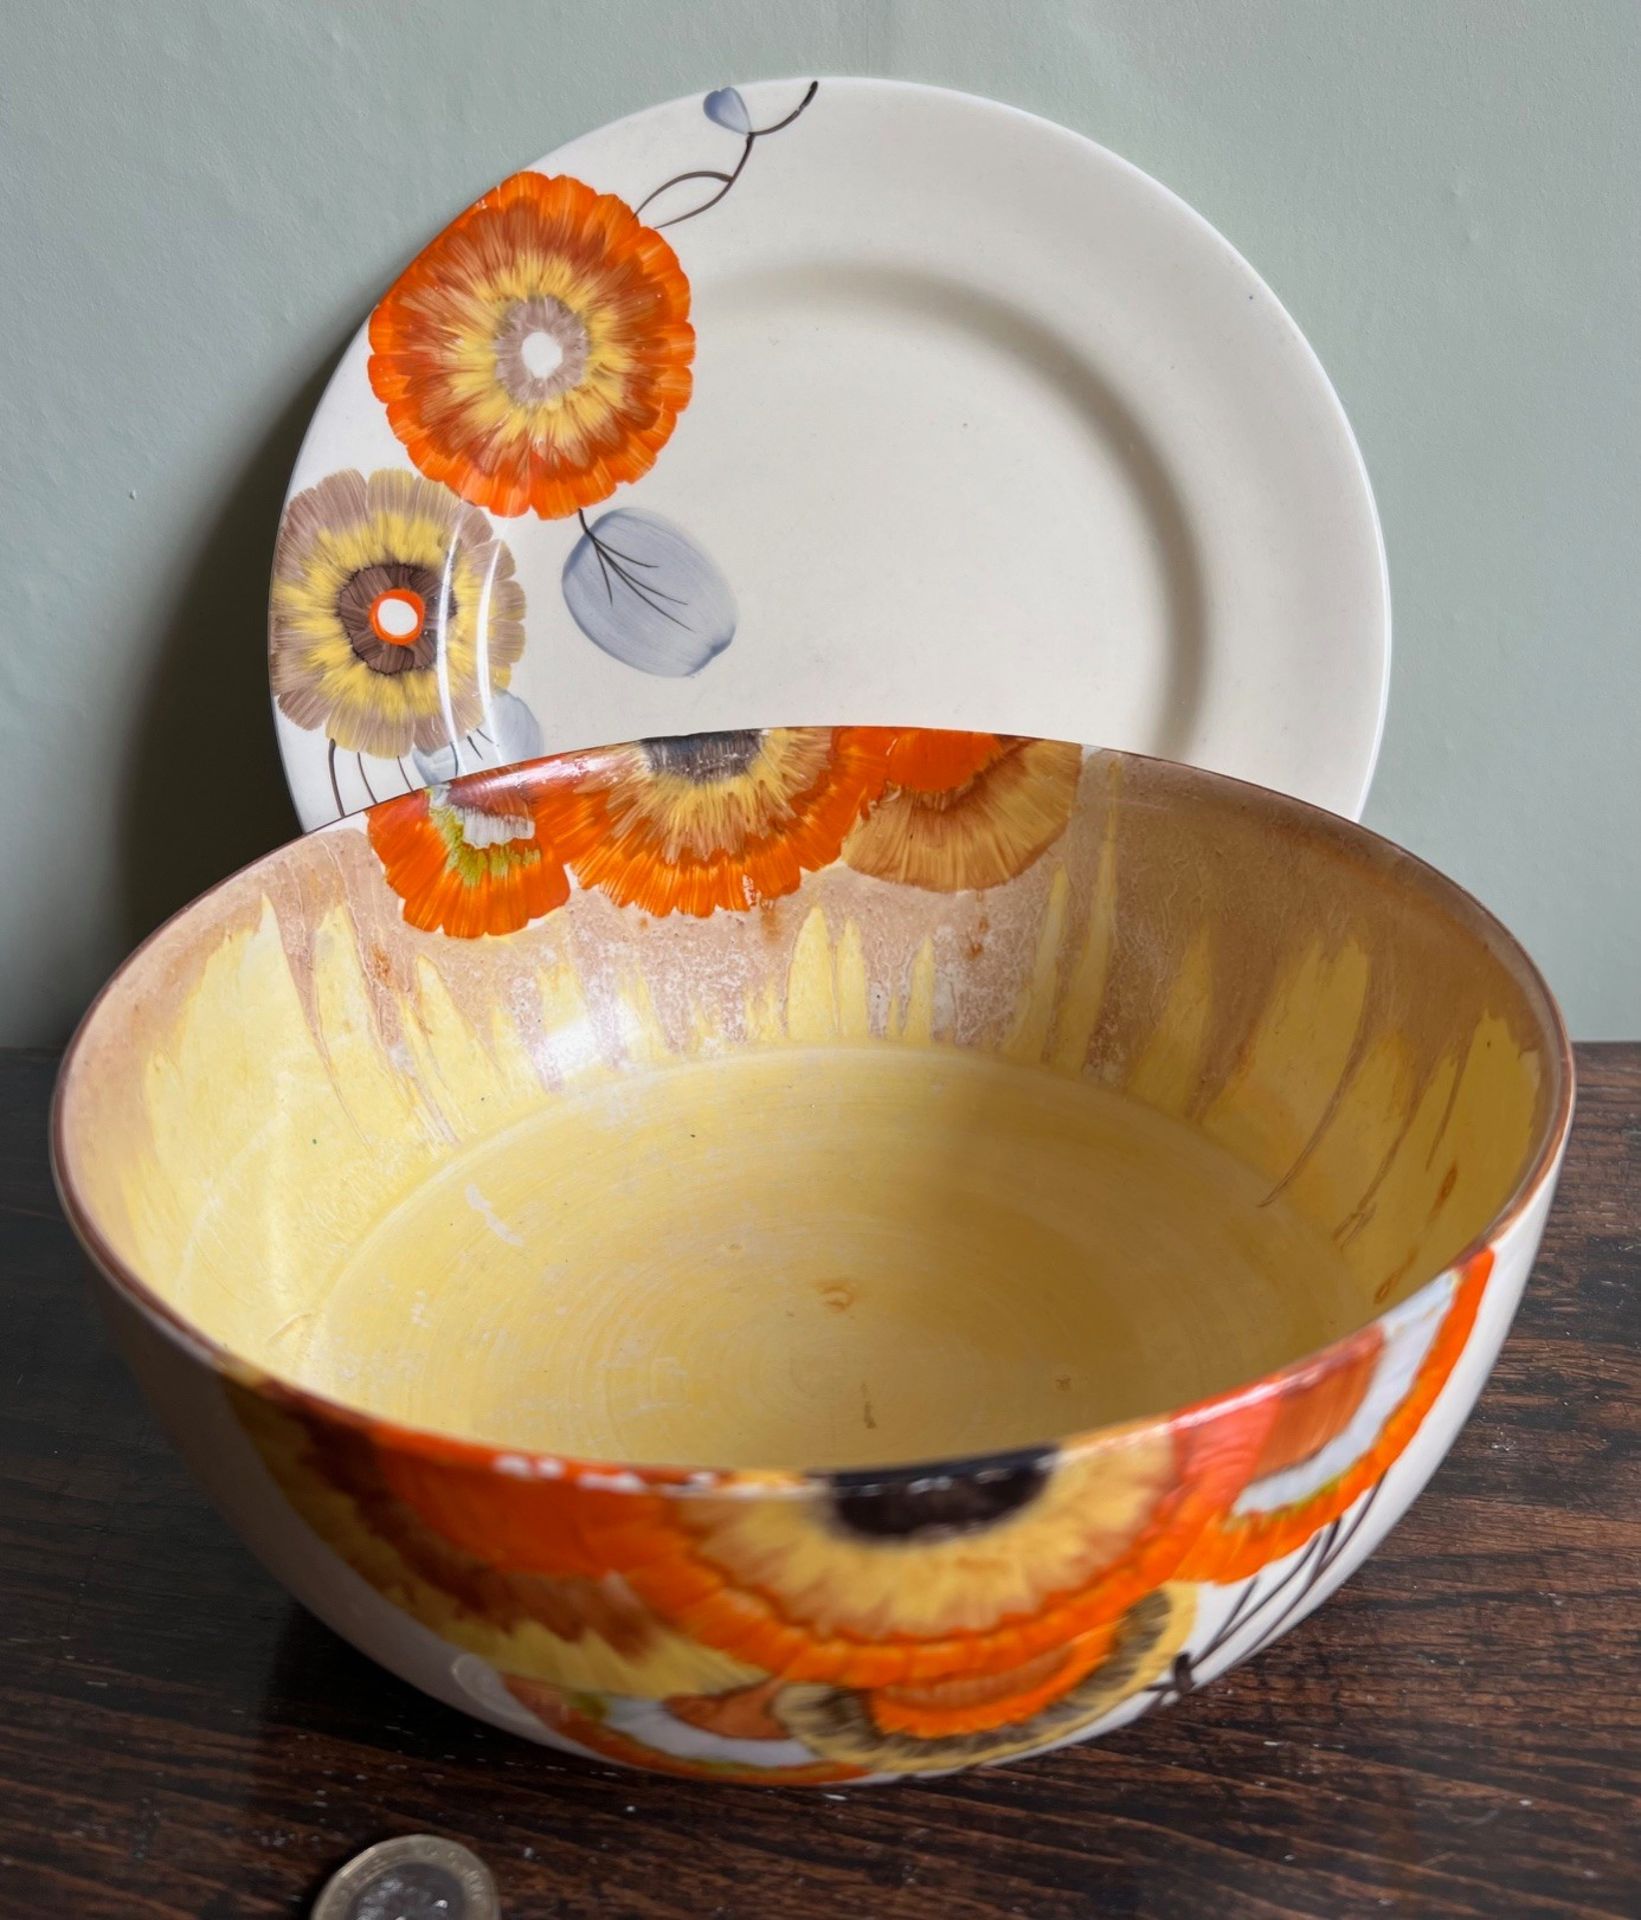 CLARICE CLIFF BIZARRE BOWL AND PLATE, BOWL DIAMETER APPROX 20.75cm, PLATE DIAMETER APPROX 23cm